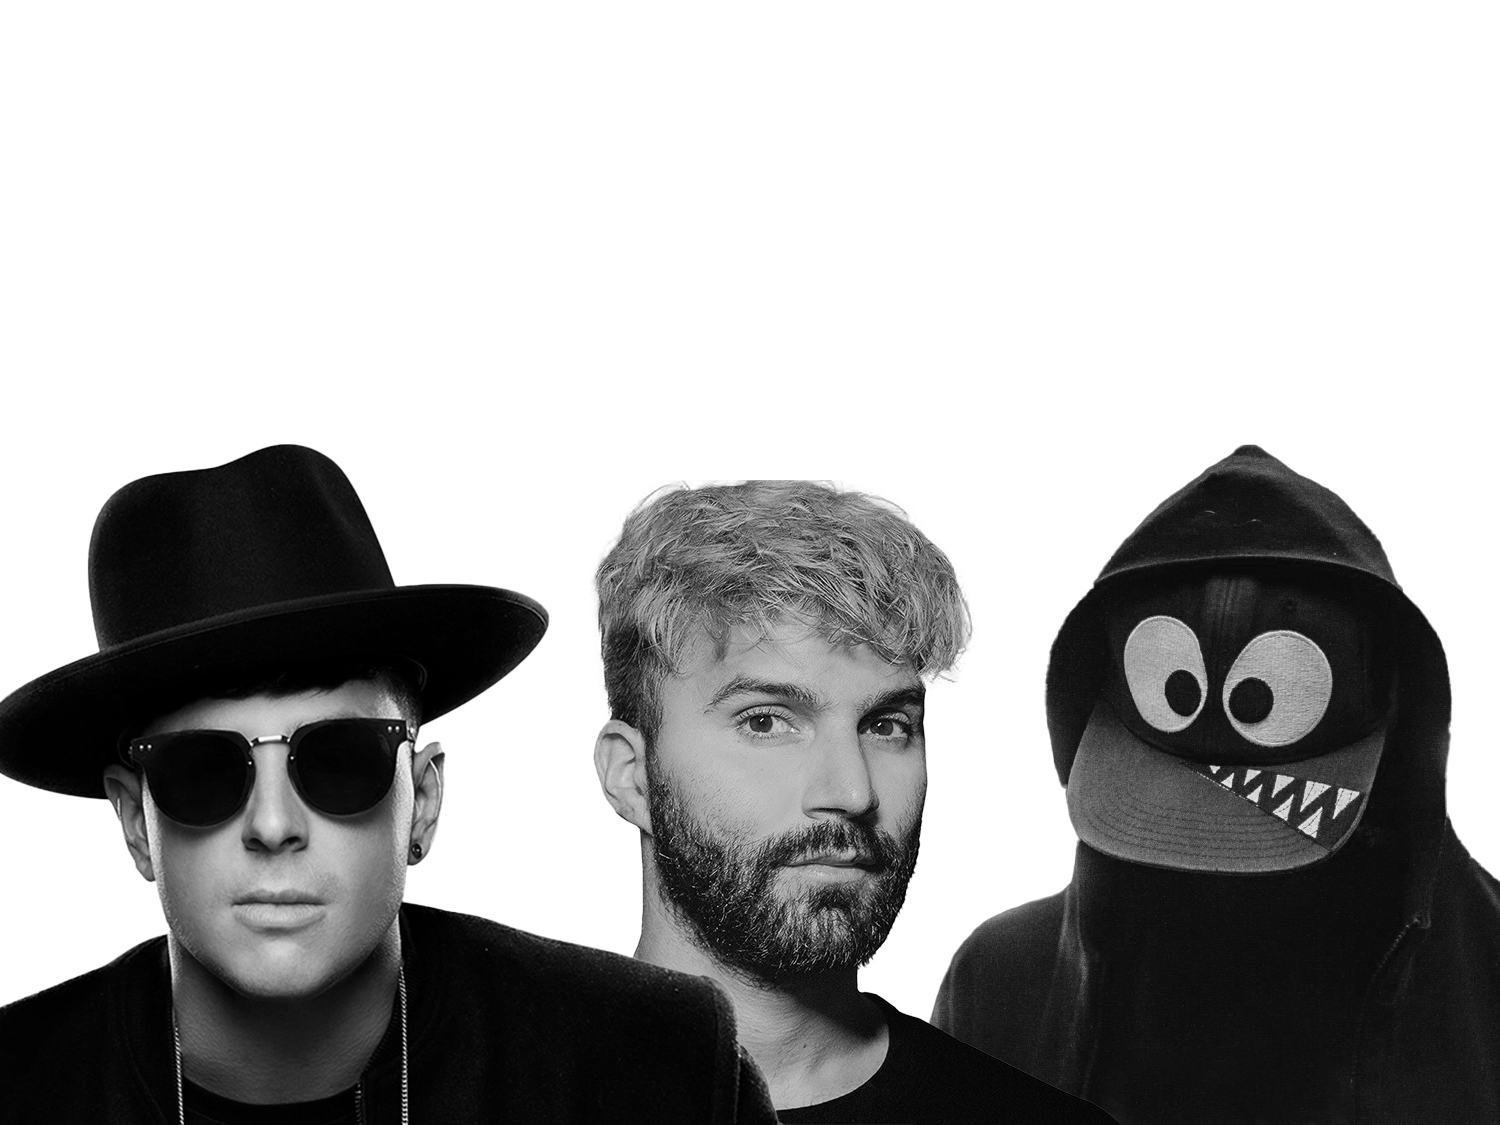 Timmy Trumpet & R3HAB are back with another collaboration titled